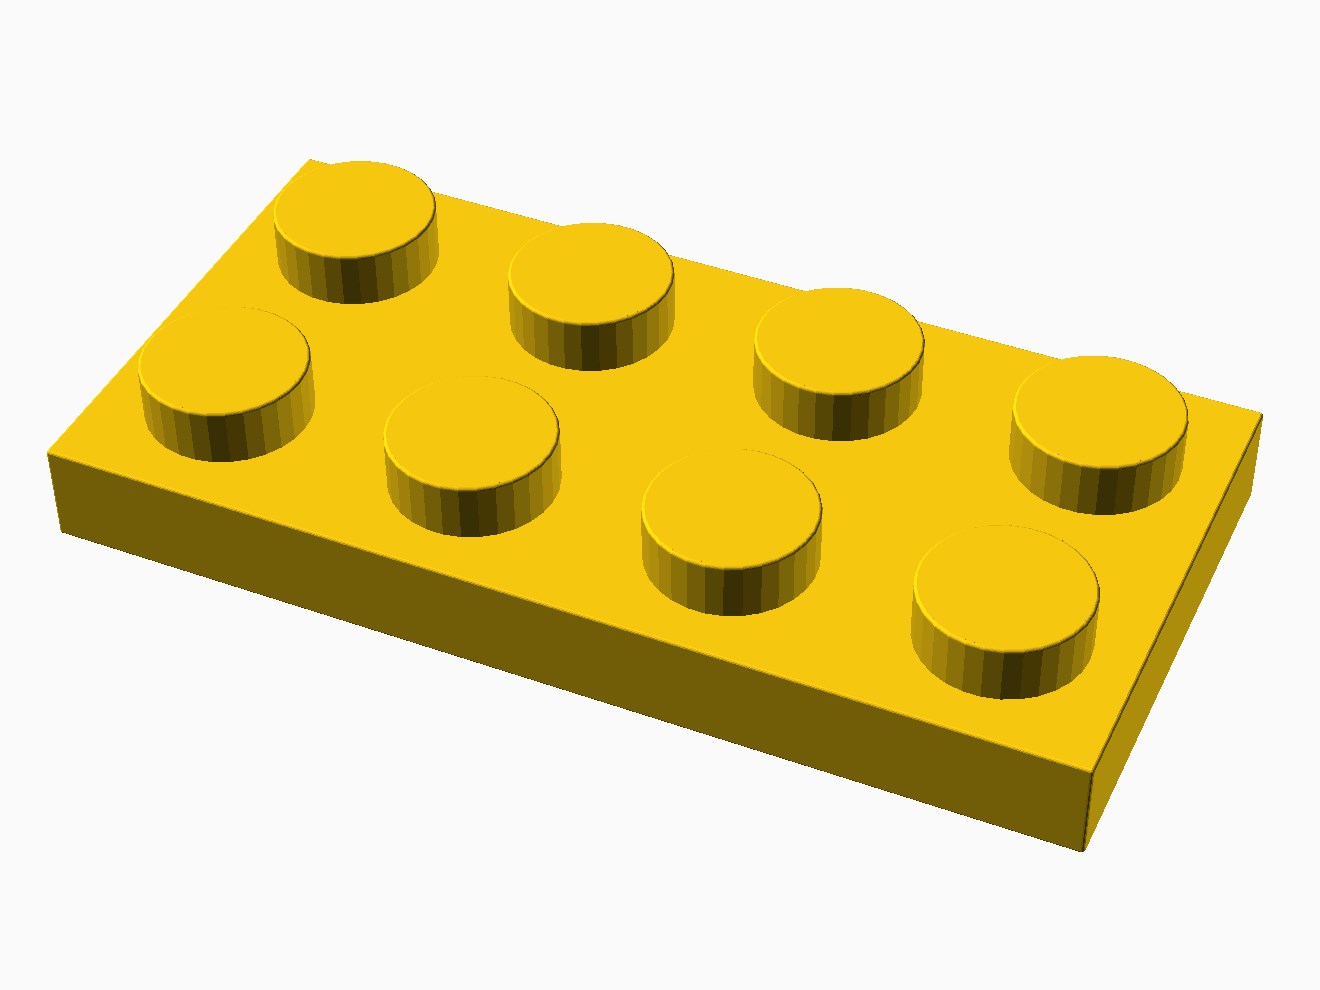 3D printable model of a LEGO 4x2 Plate with standard knobs.